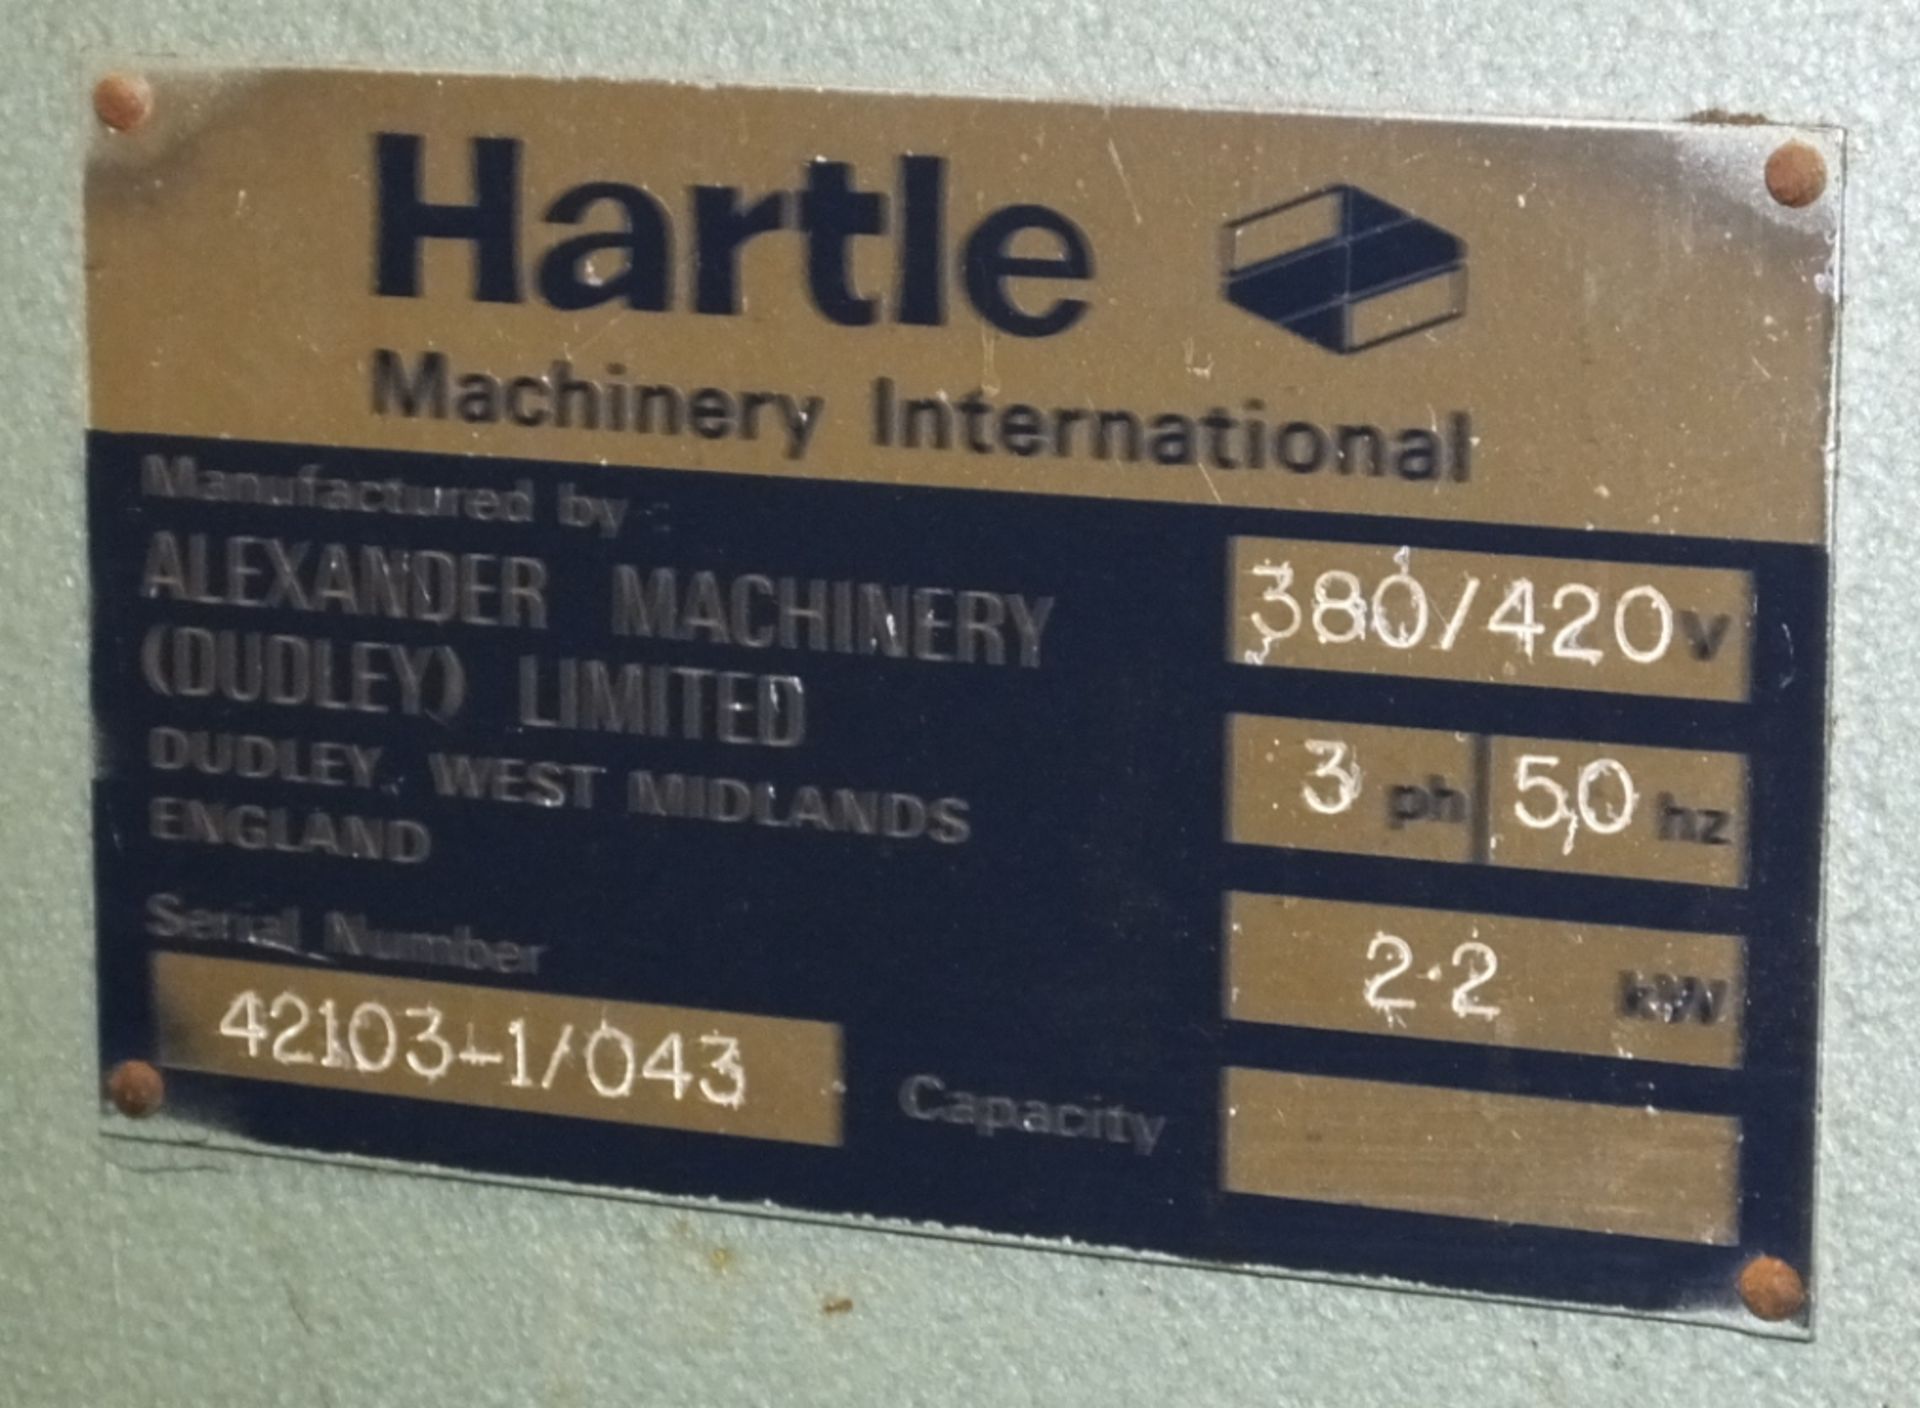 Hartle Midsaw "Minor Deepthroat" Tool Room Bandsaw - £20 Loading Charge Applied to this lo - Image 6 of 10